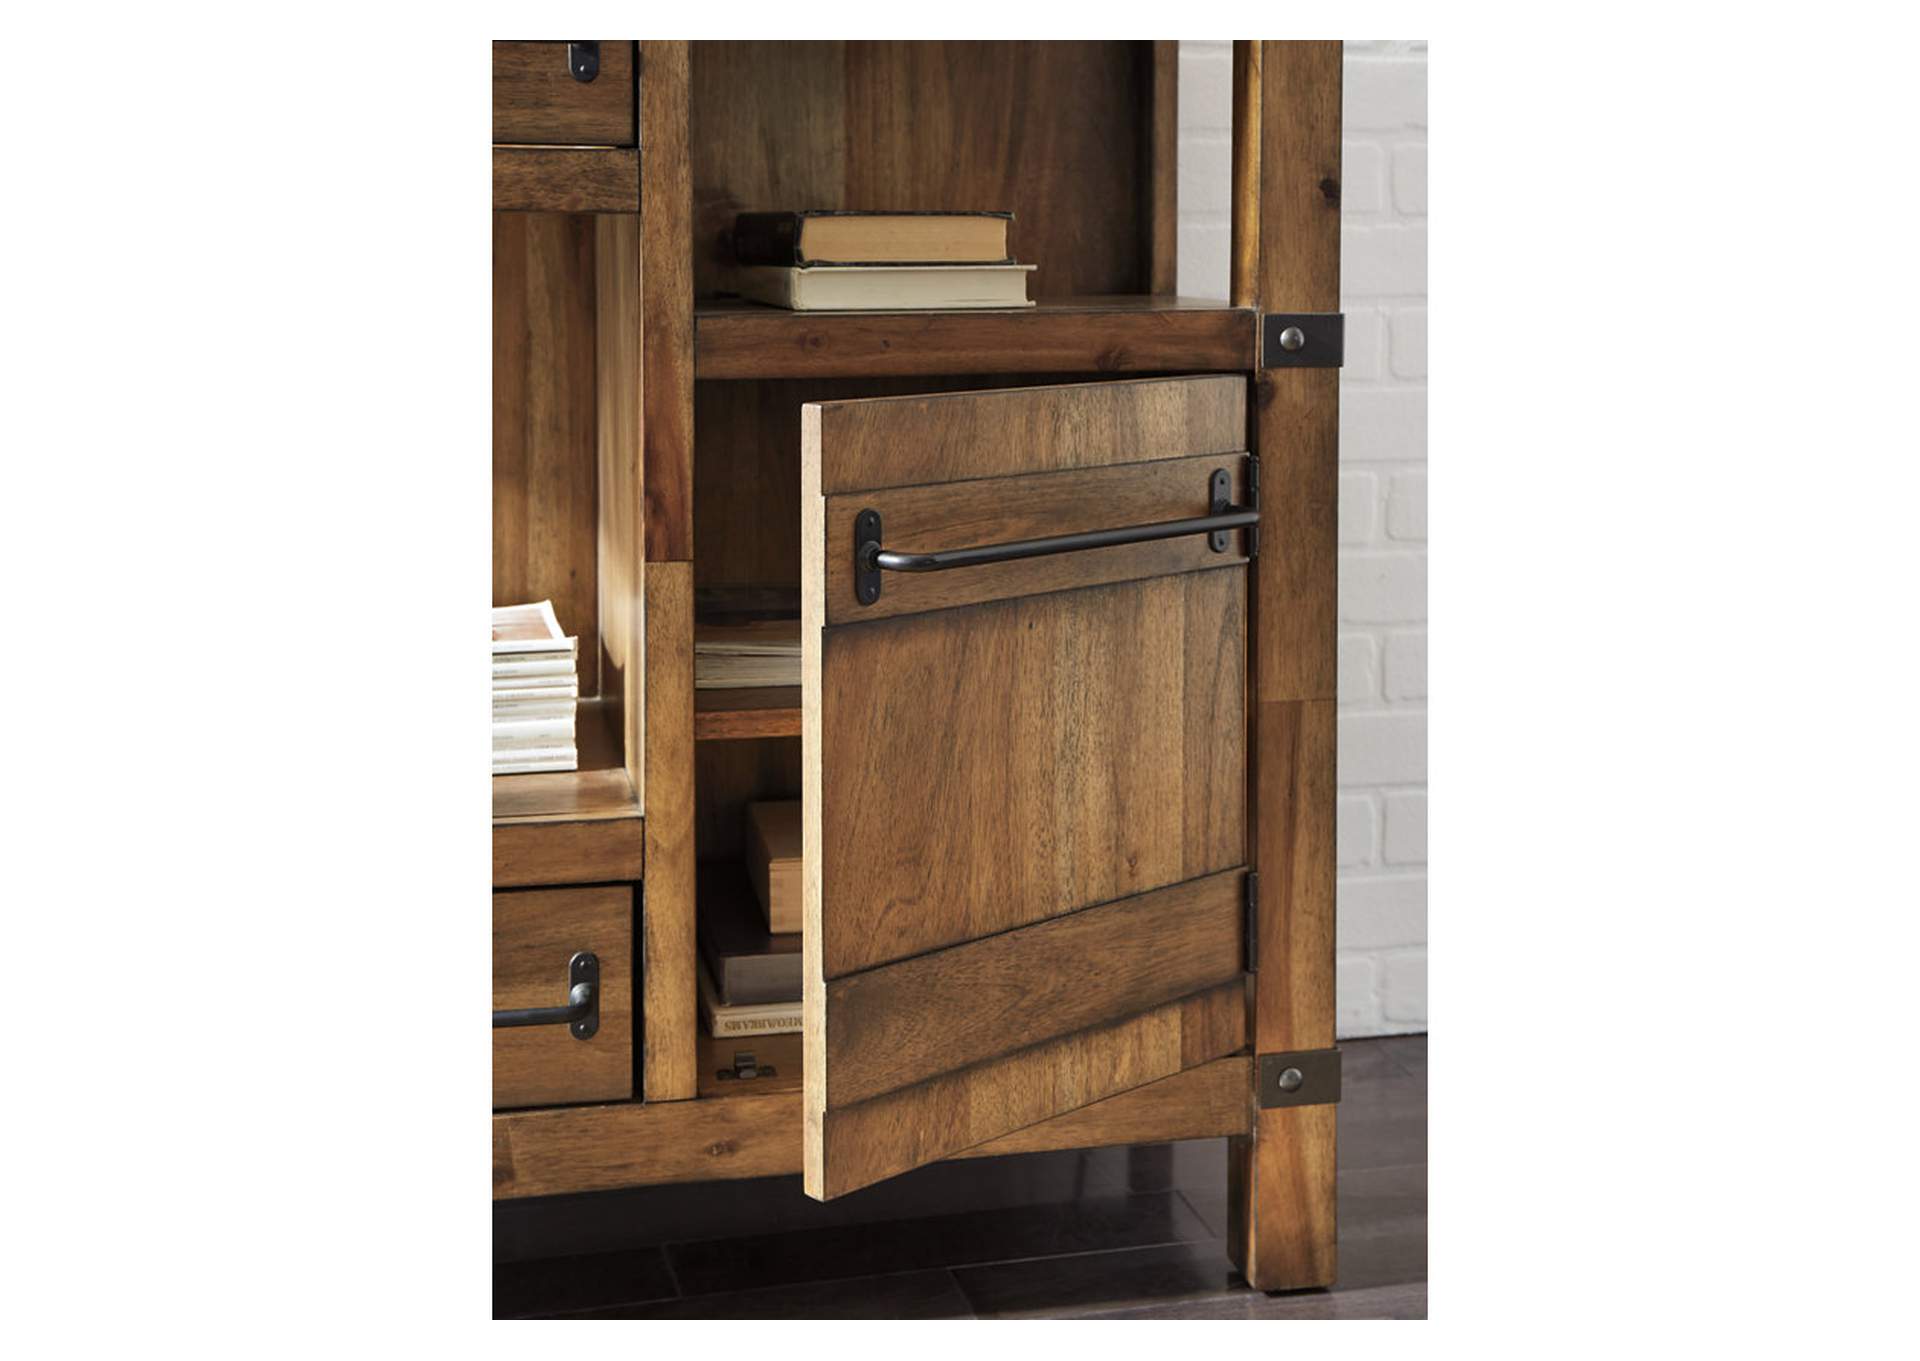 Roybeck Accent Cabinet,Direct To Consumer Express